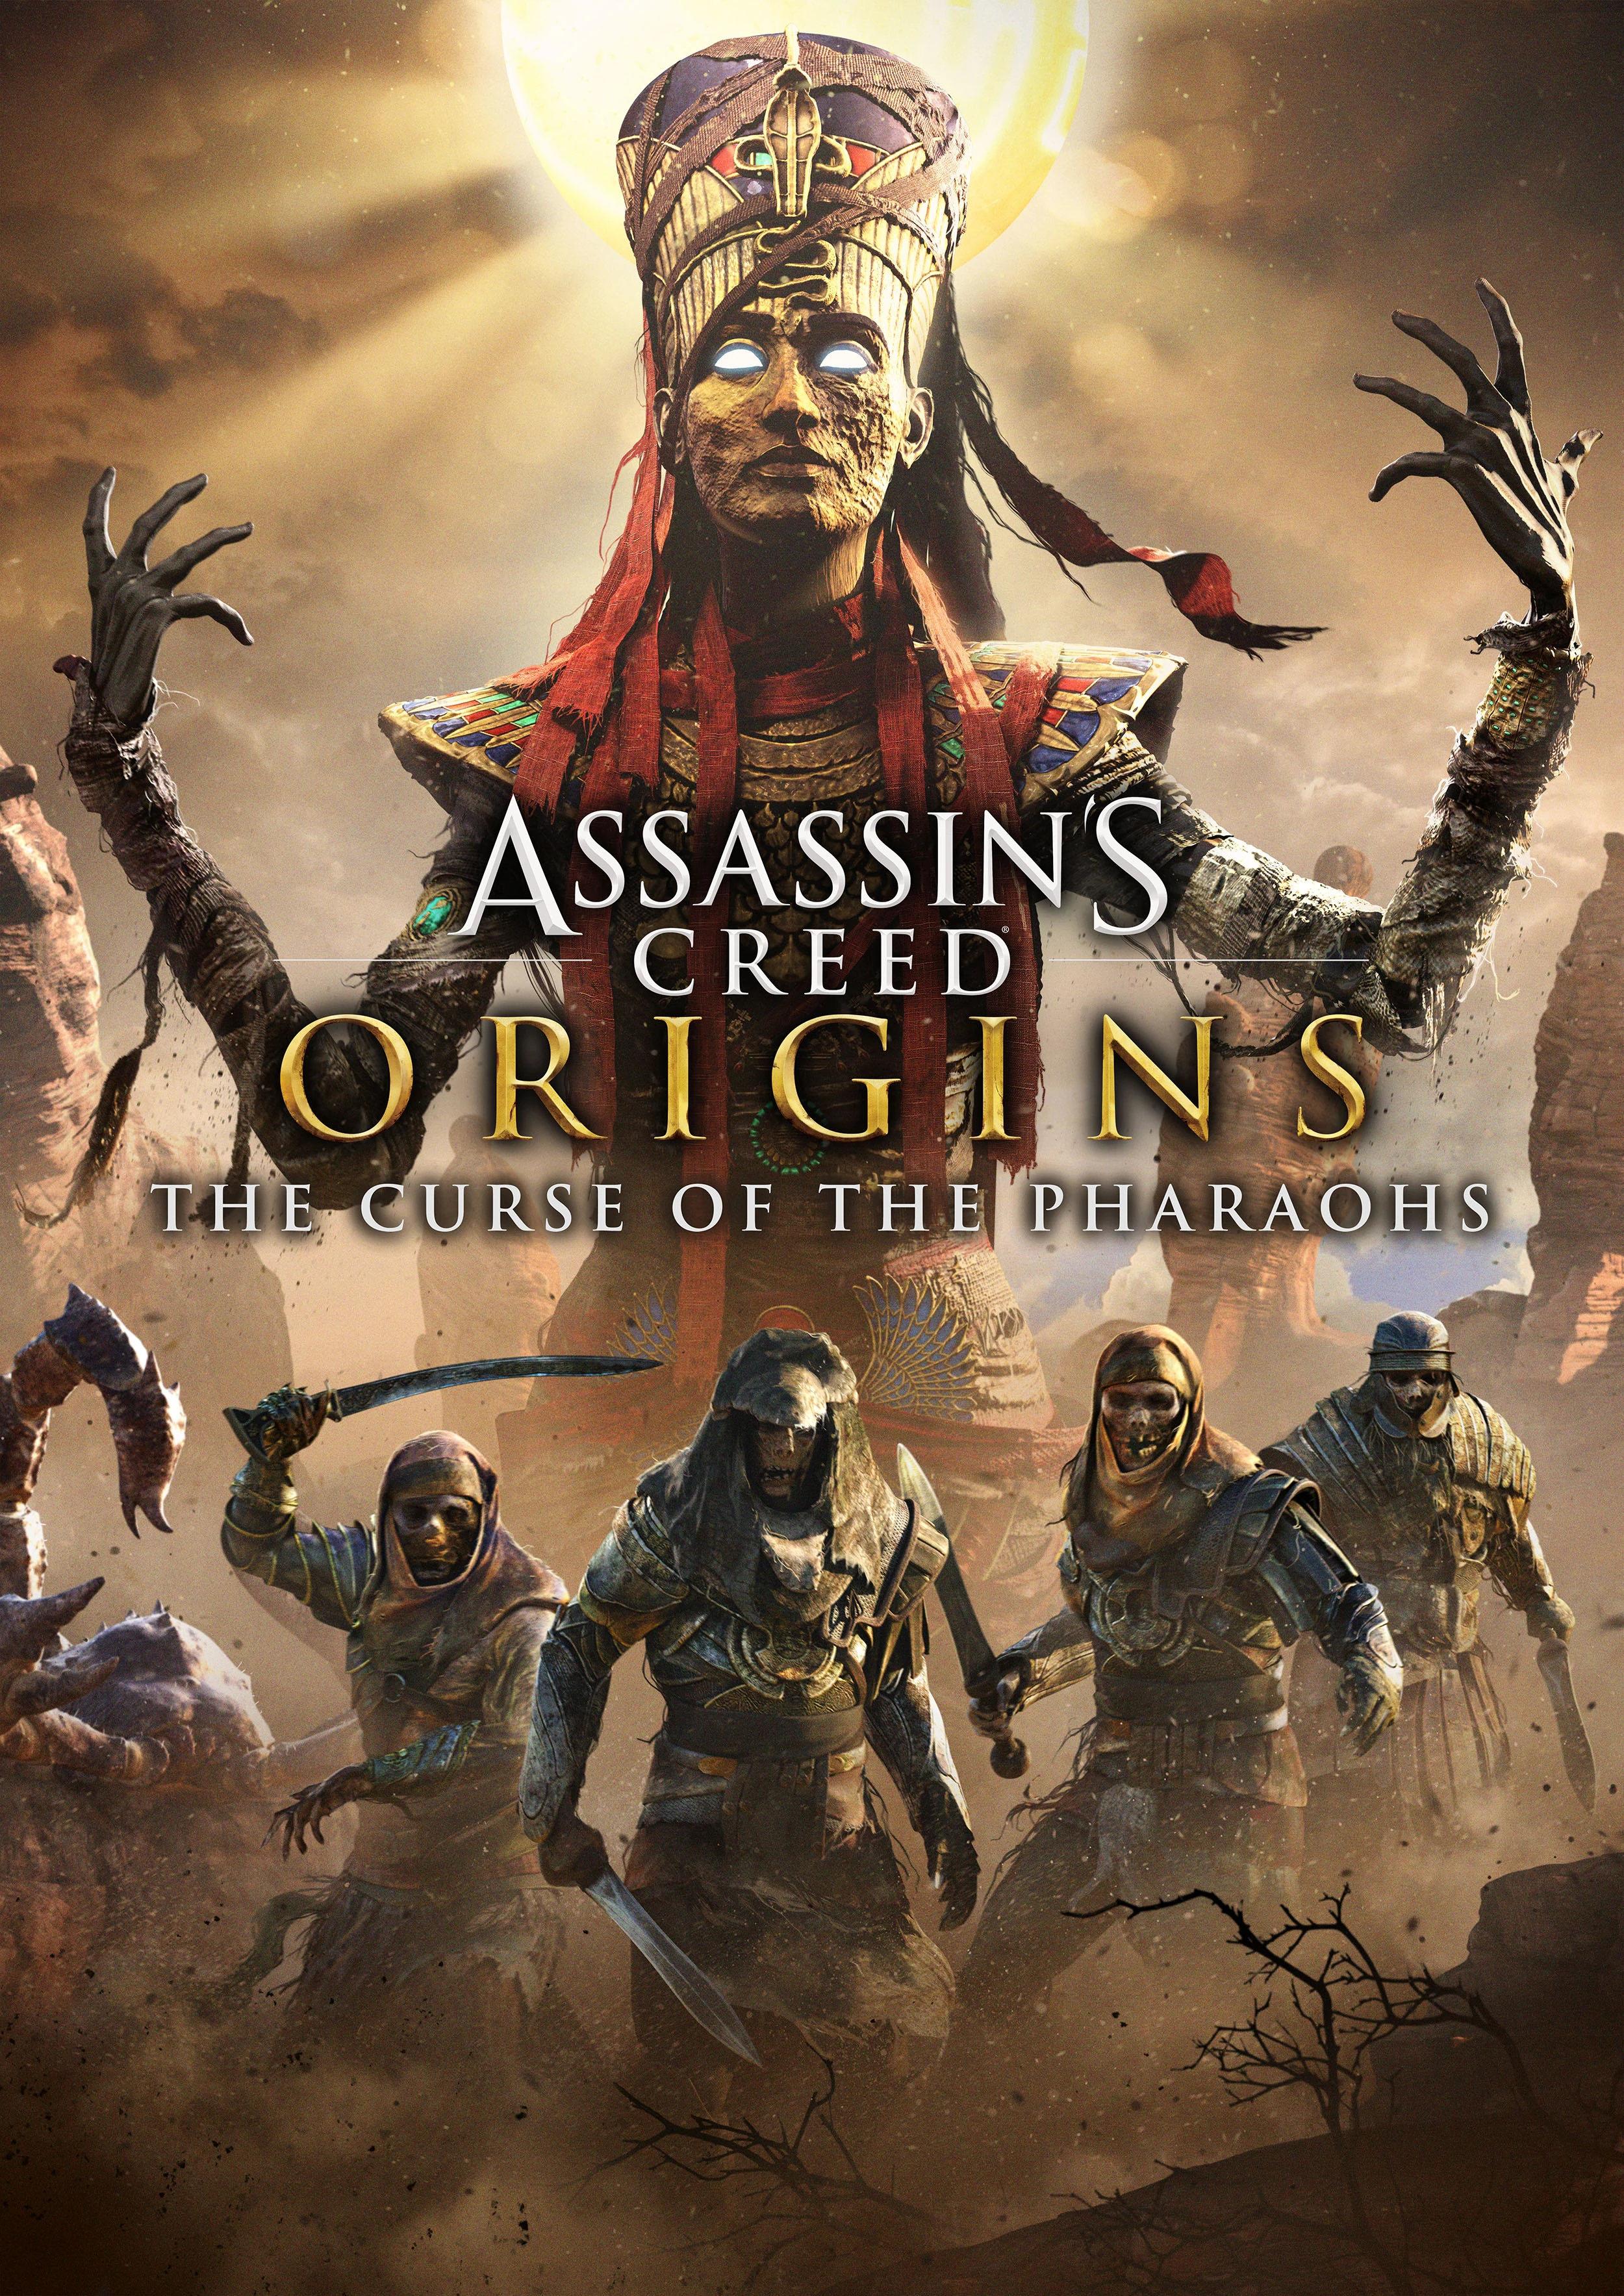 of the Pharaohs | Assassin's Creed Wiki